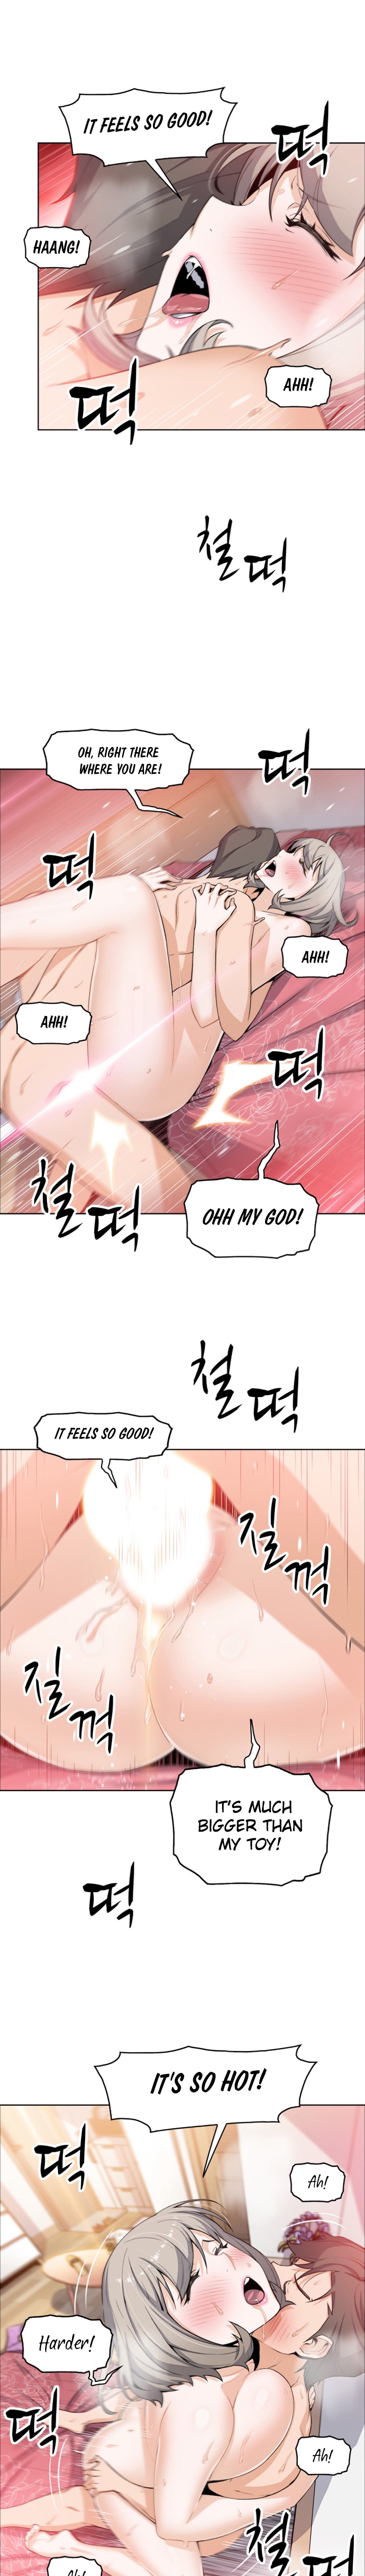 Housekeeper Manhwa - Chapter 18 Page 5